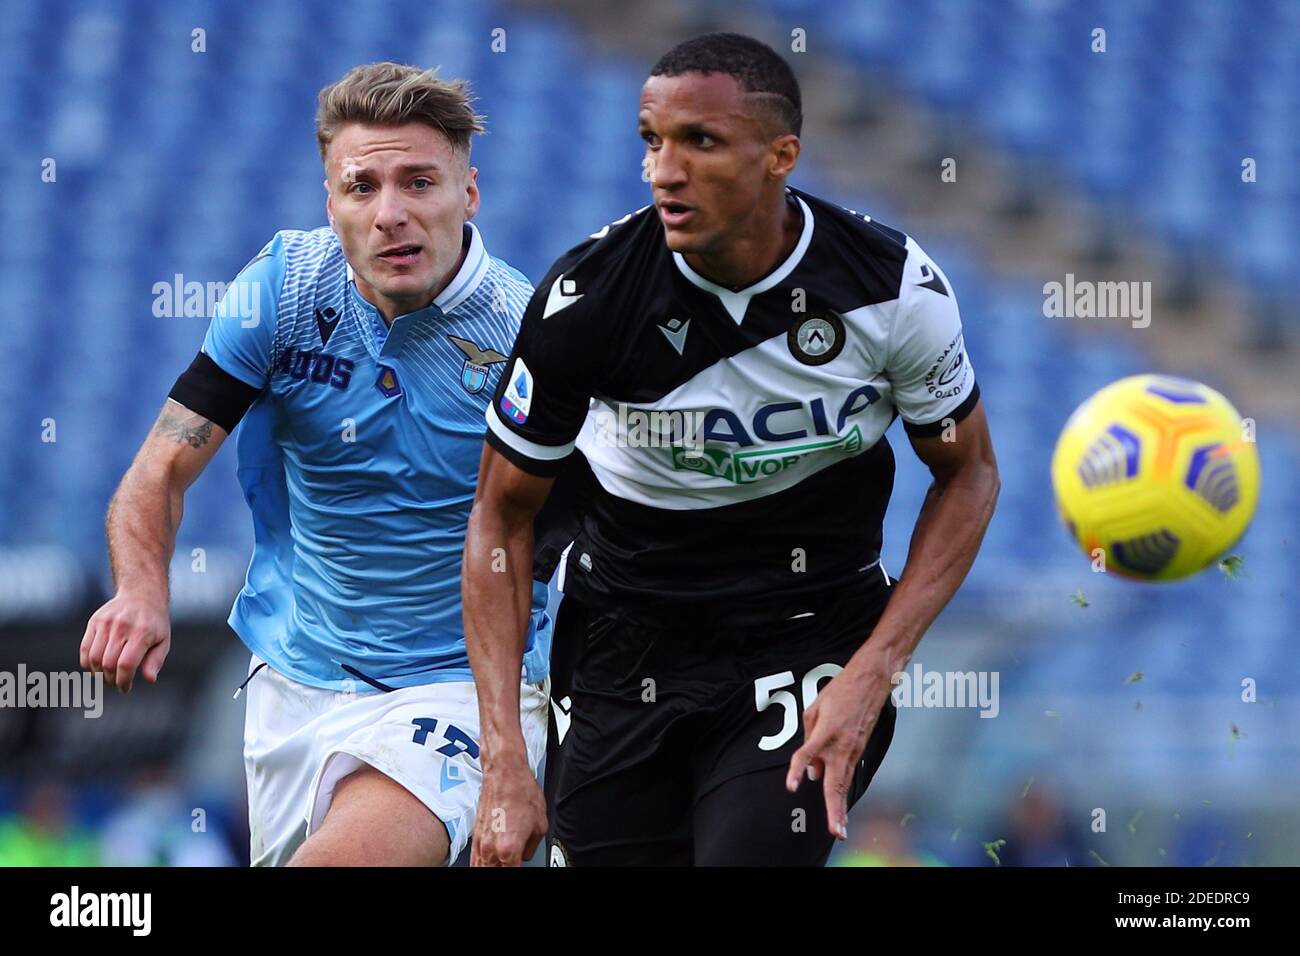 Ciro Immobile of Lazio (L) vies for the ball with Rodrigo Becao of Udinese (R) during the Italian championship Serie A foot / LM Stock Photo